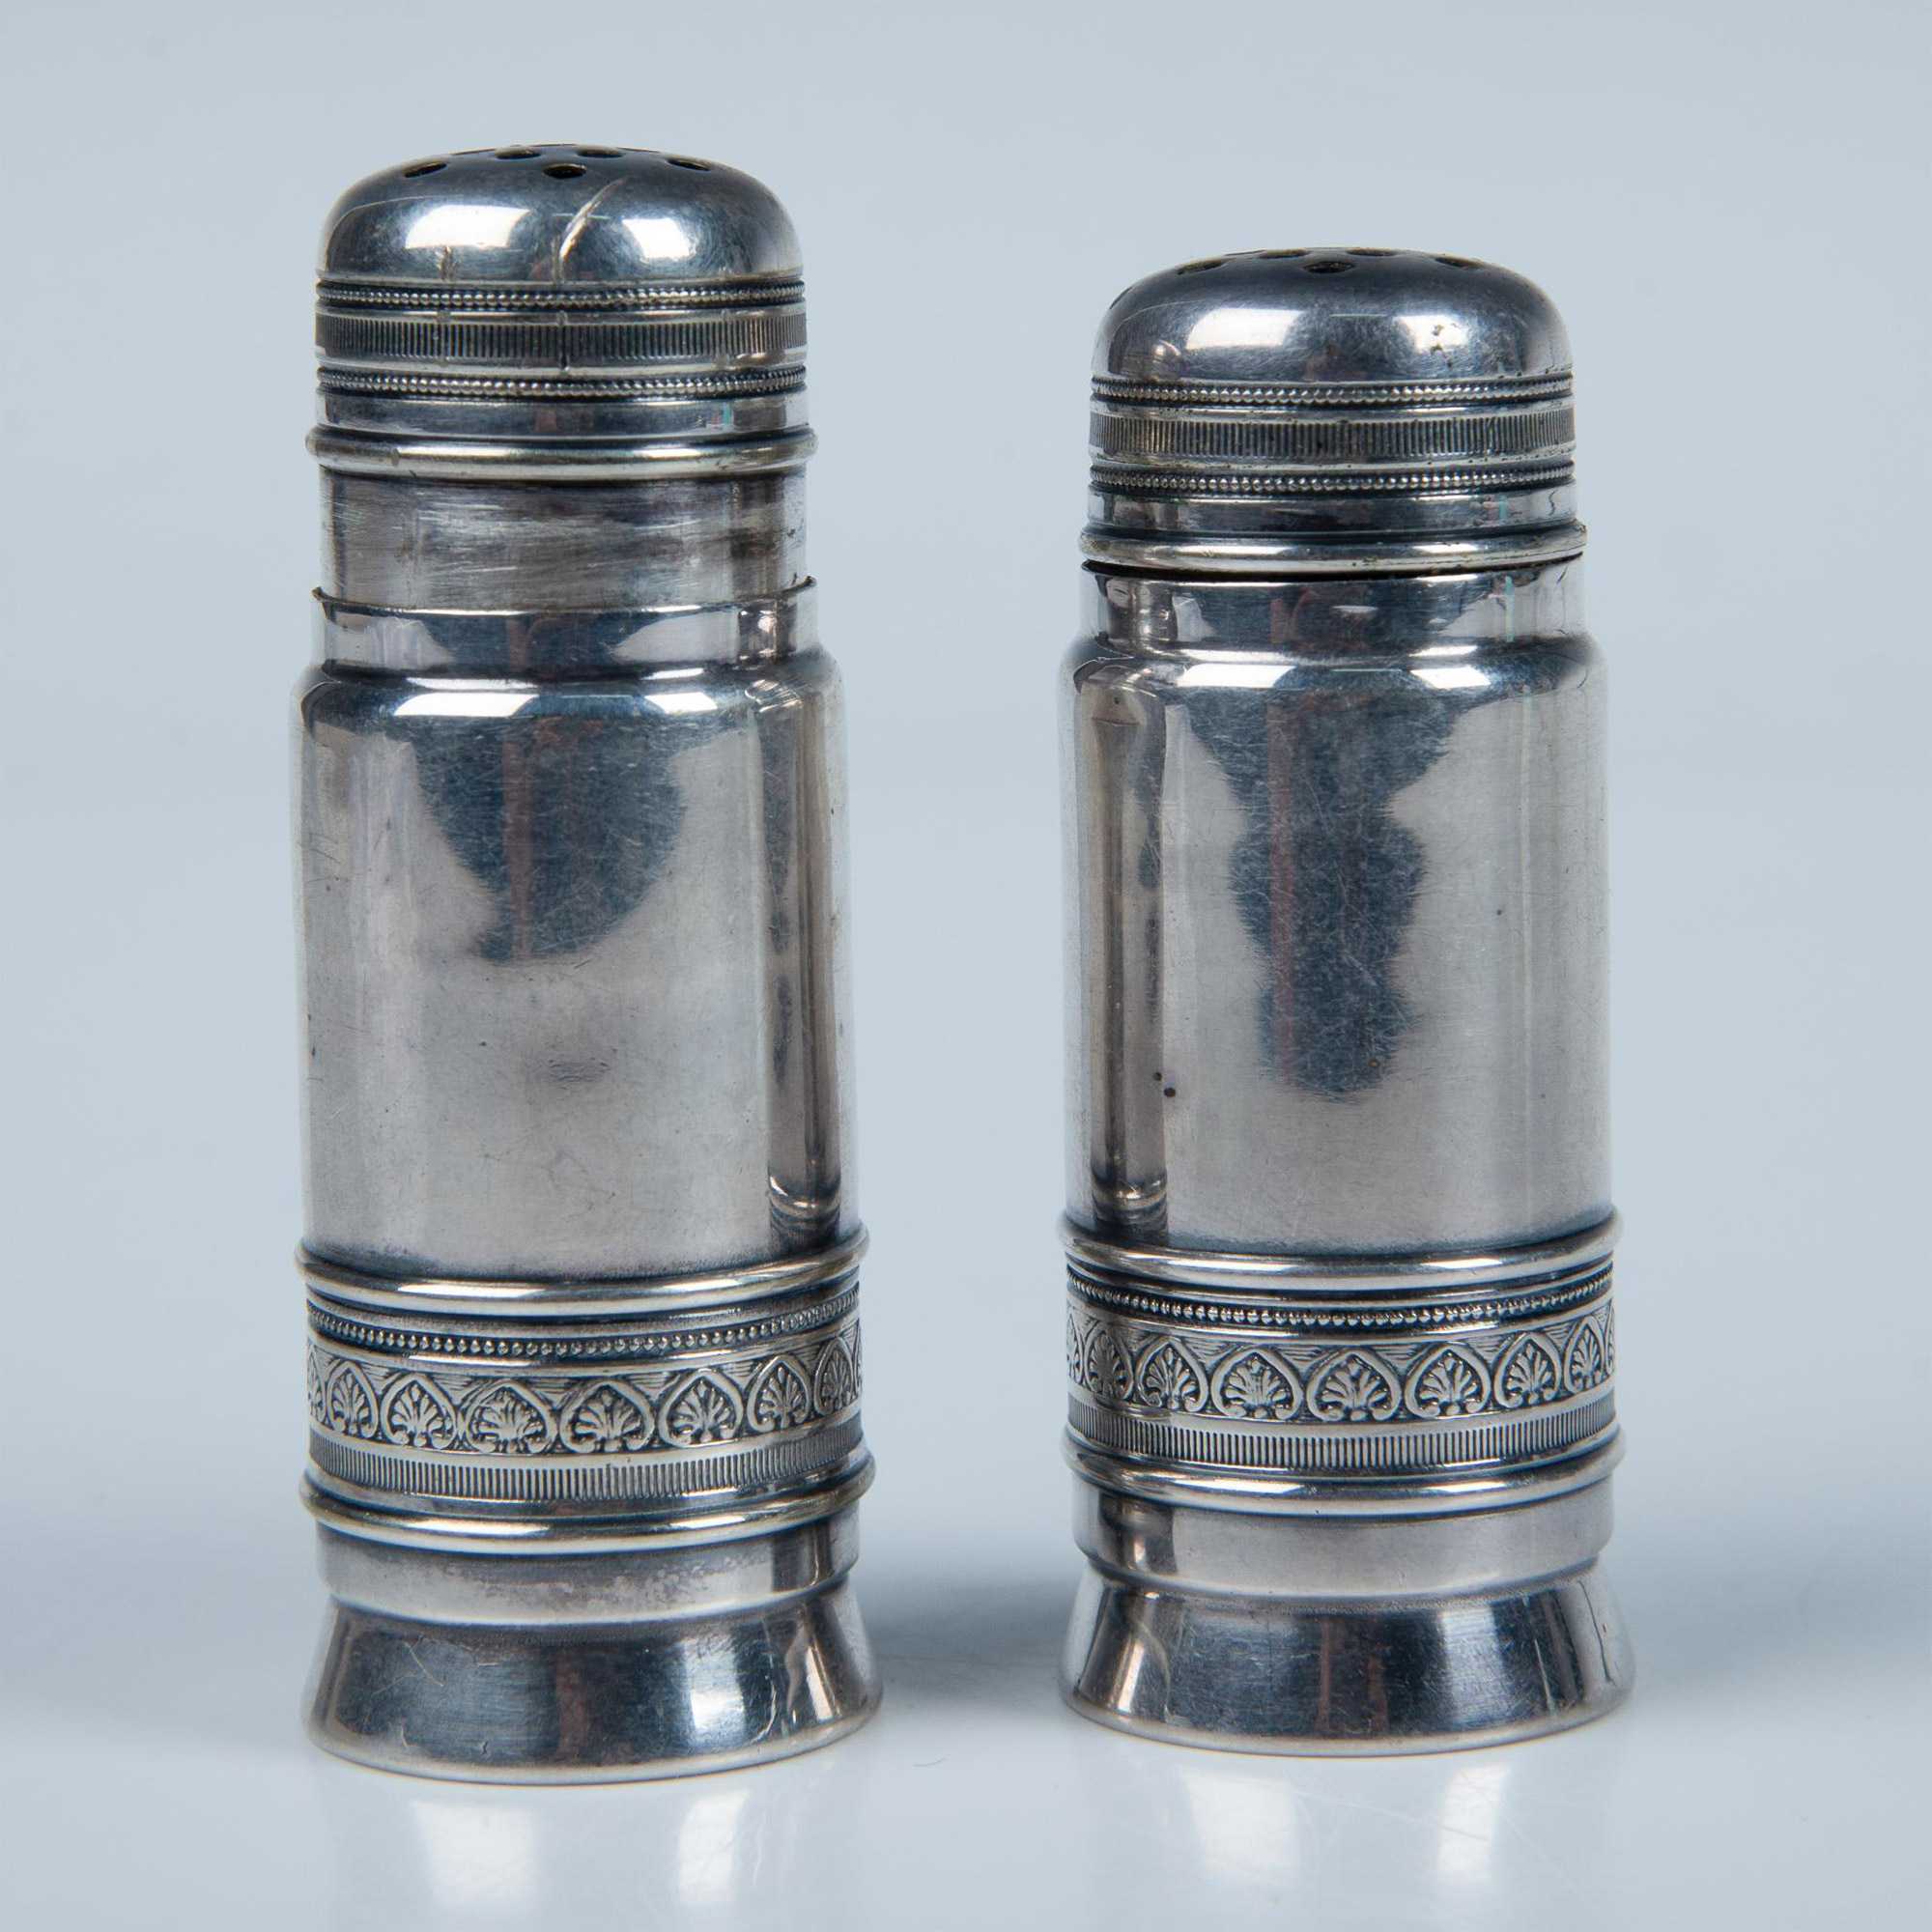 2pc Vintage Gorham Silverplate Salt and Pepper Shakers - Image 4 of 4